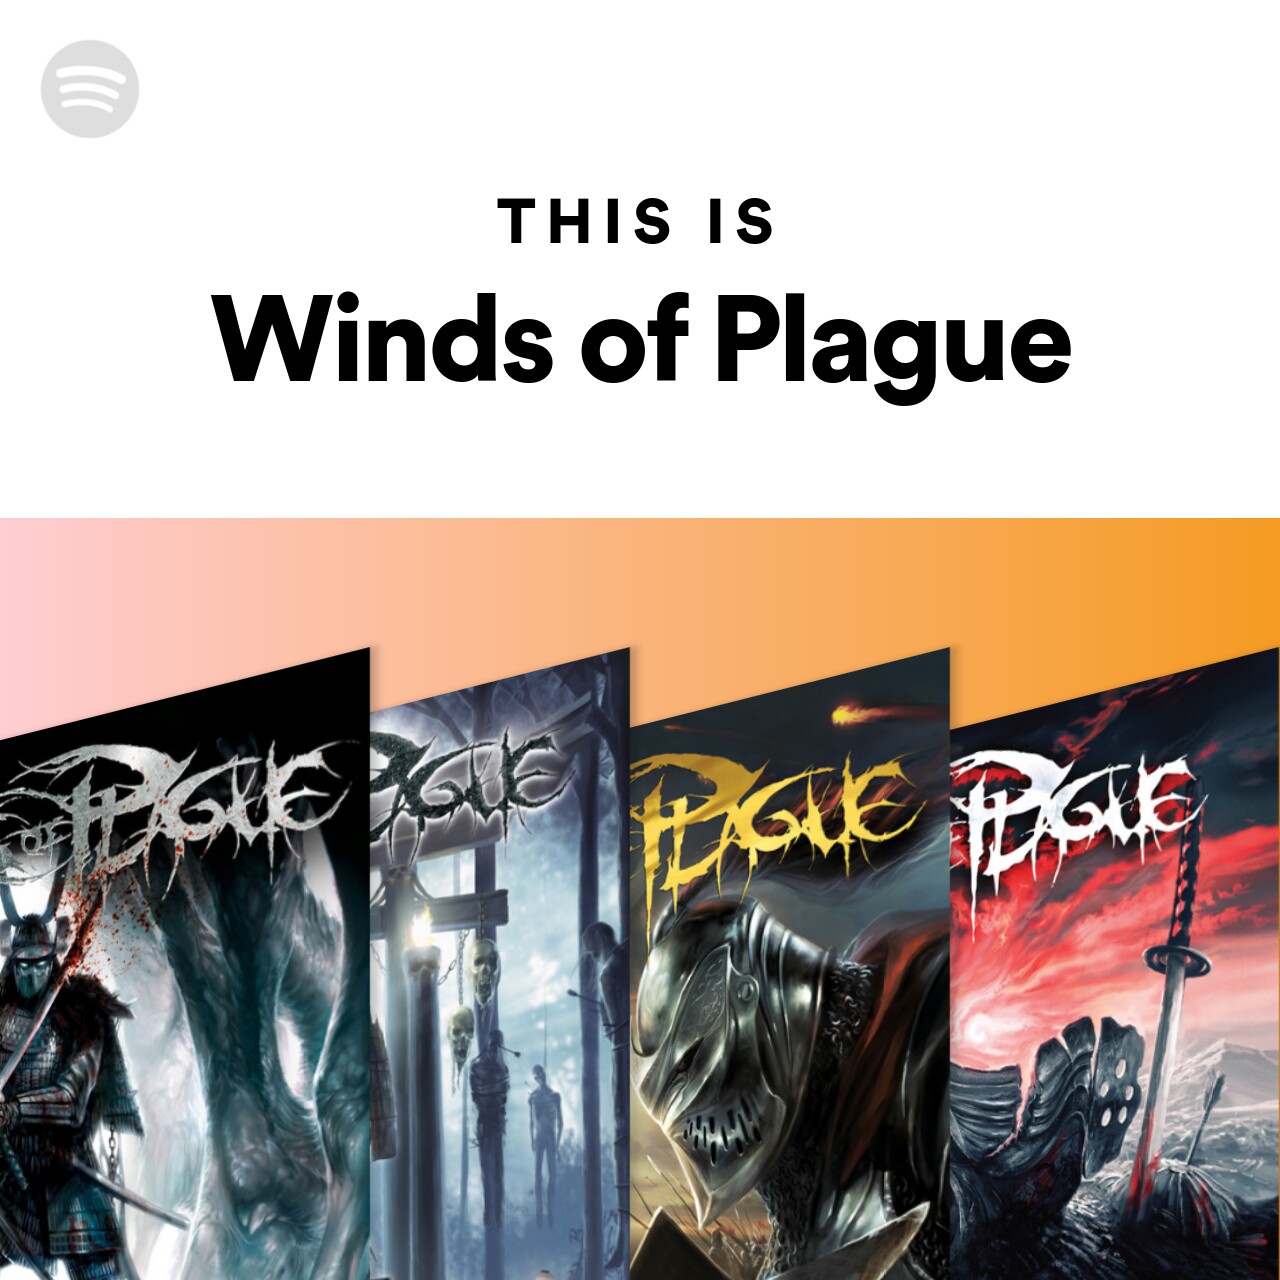 This Is Winds of Plague